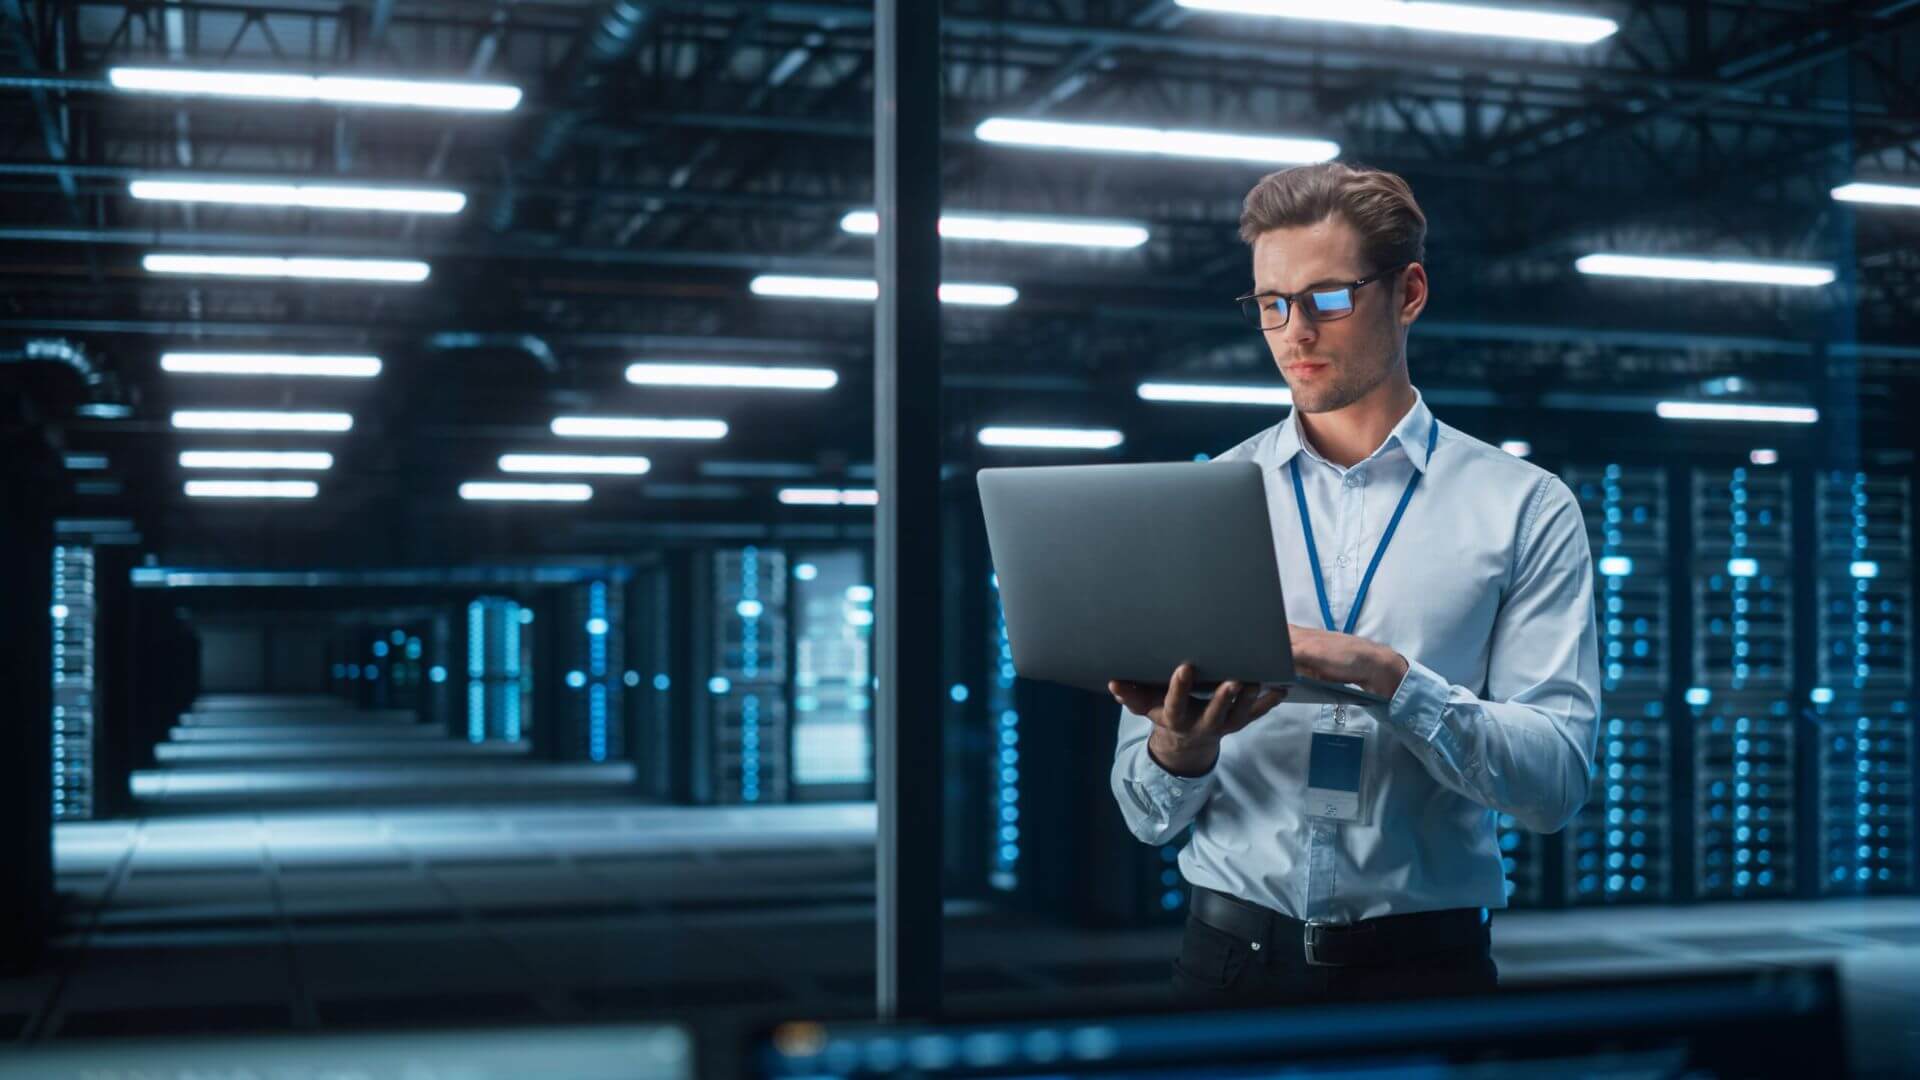 A Man Wearing Glasses, an IT Specialist, Holds a Laptop in a Server Room, Managing Technical Tasks